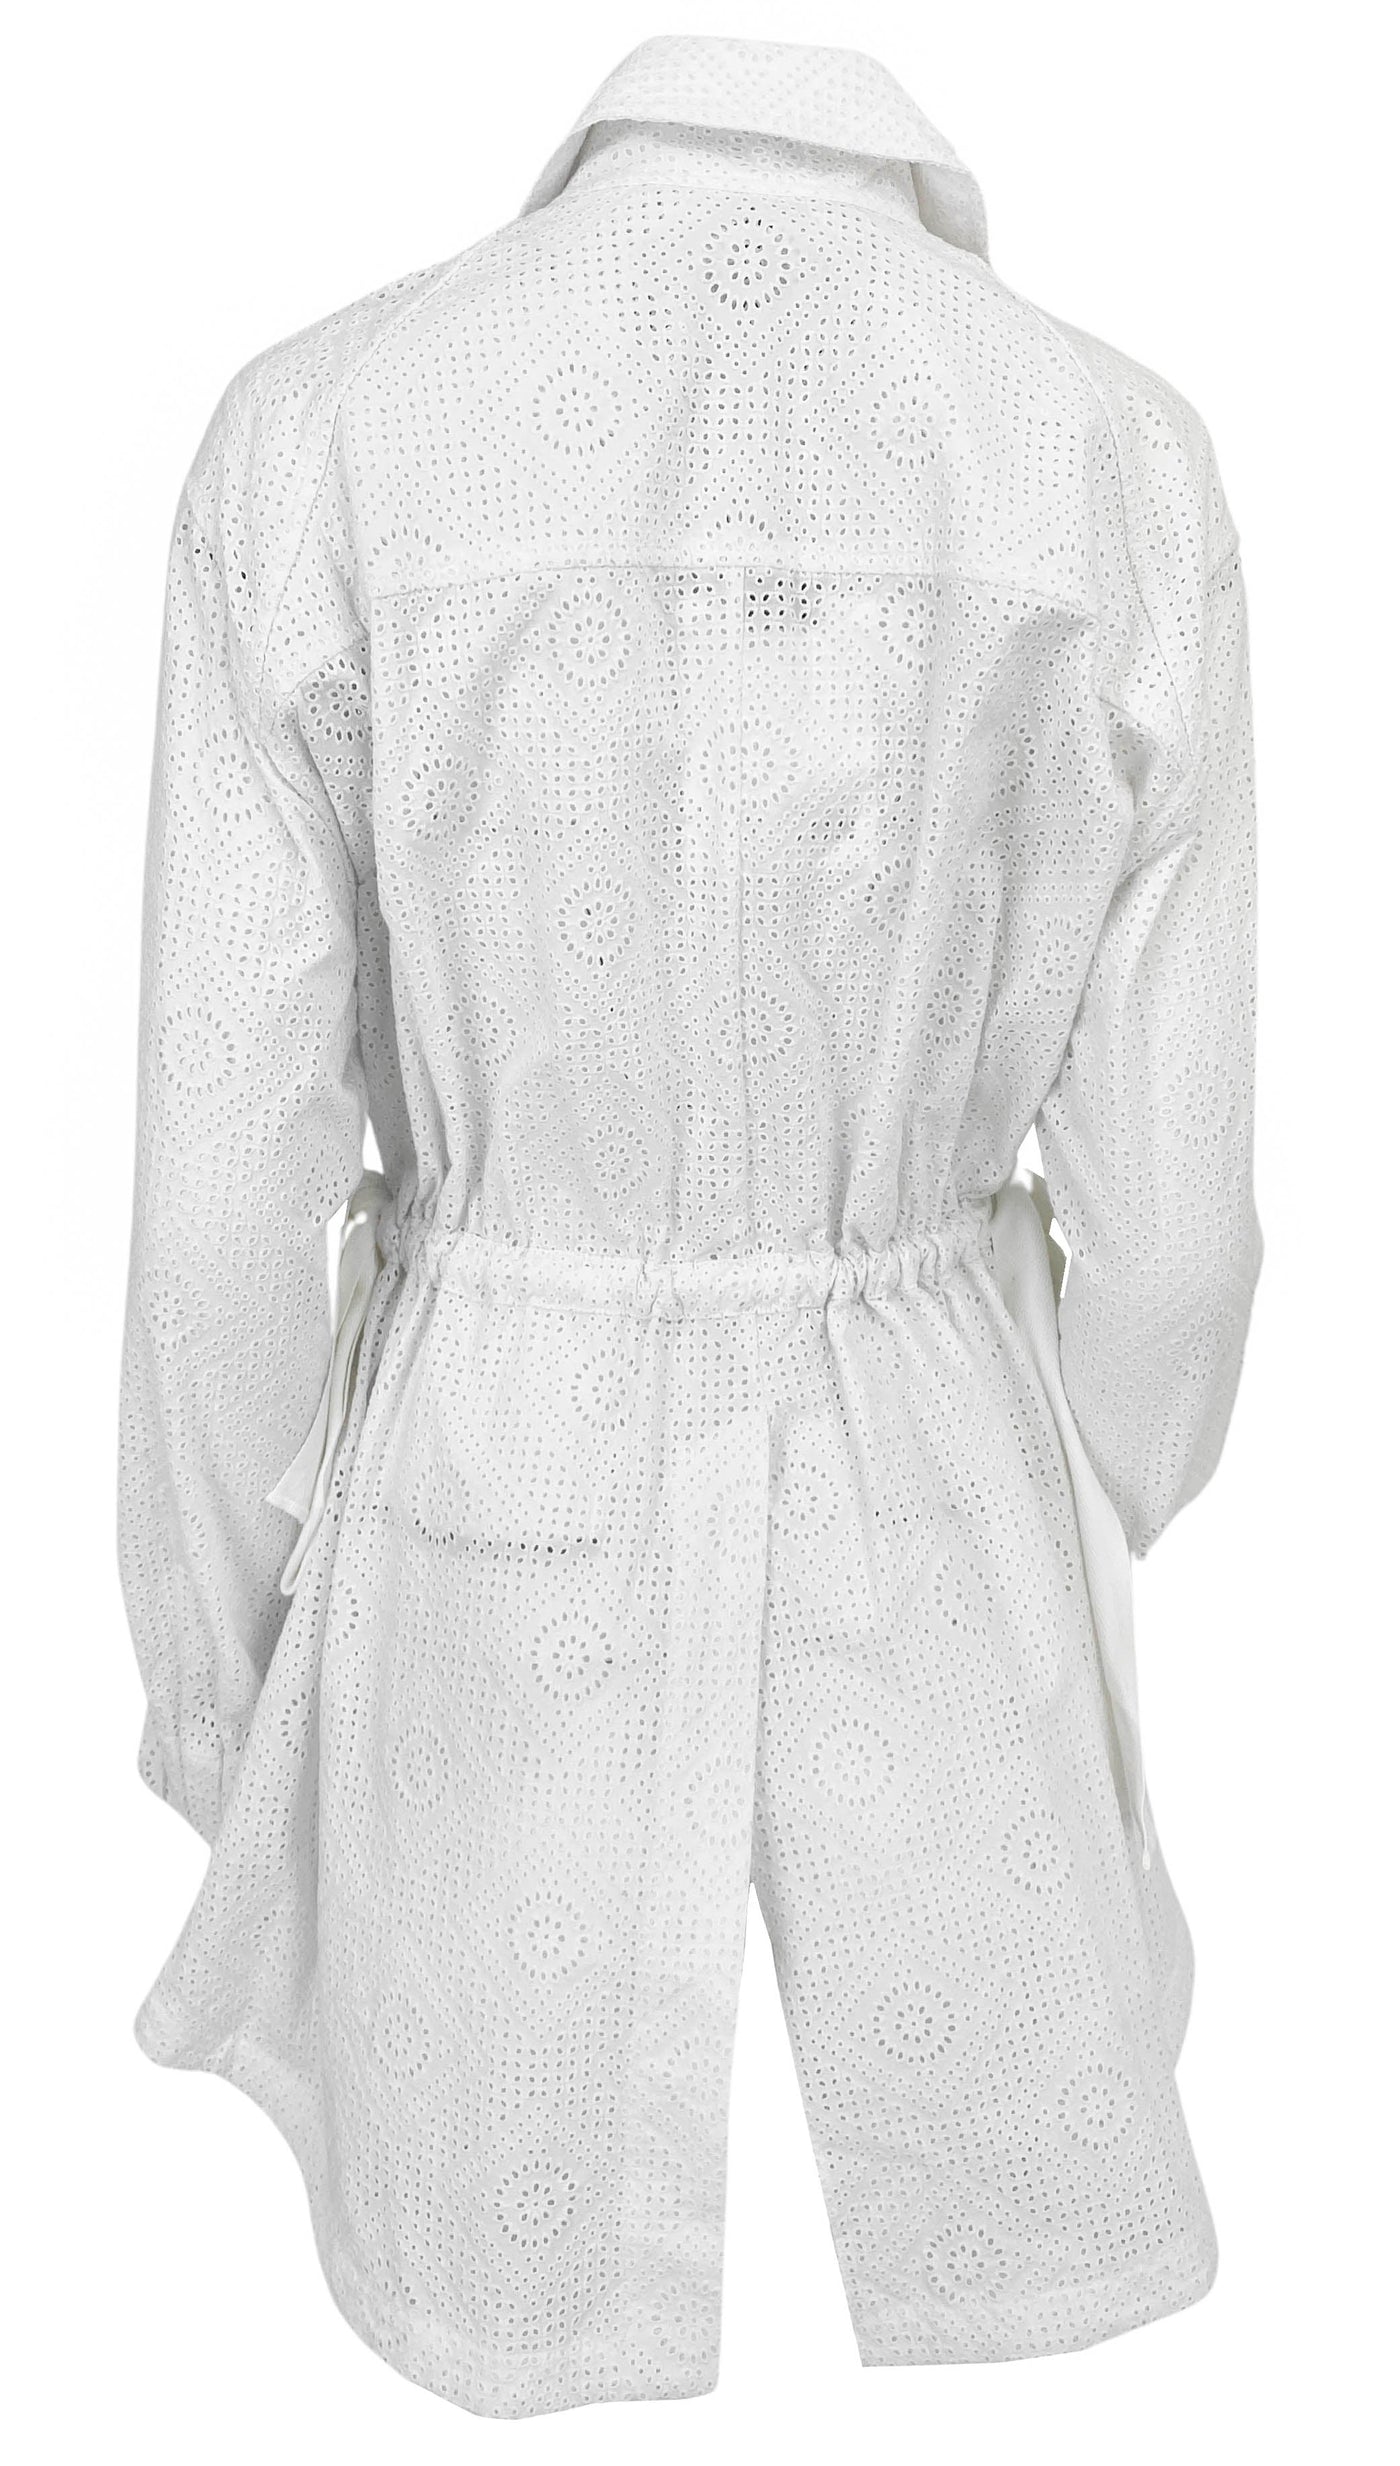 Adam Lippes Anorak Jacket in White Eyelet - Discounts on Adam Lippes at UAL